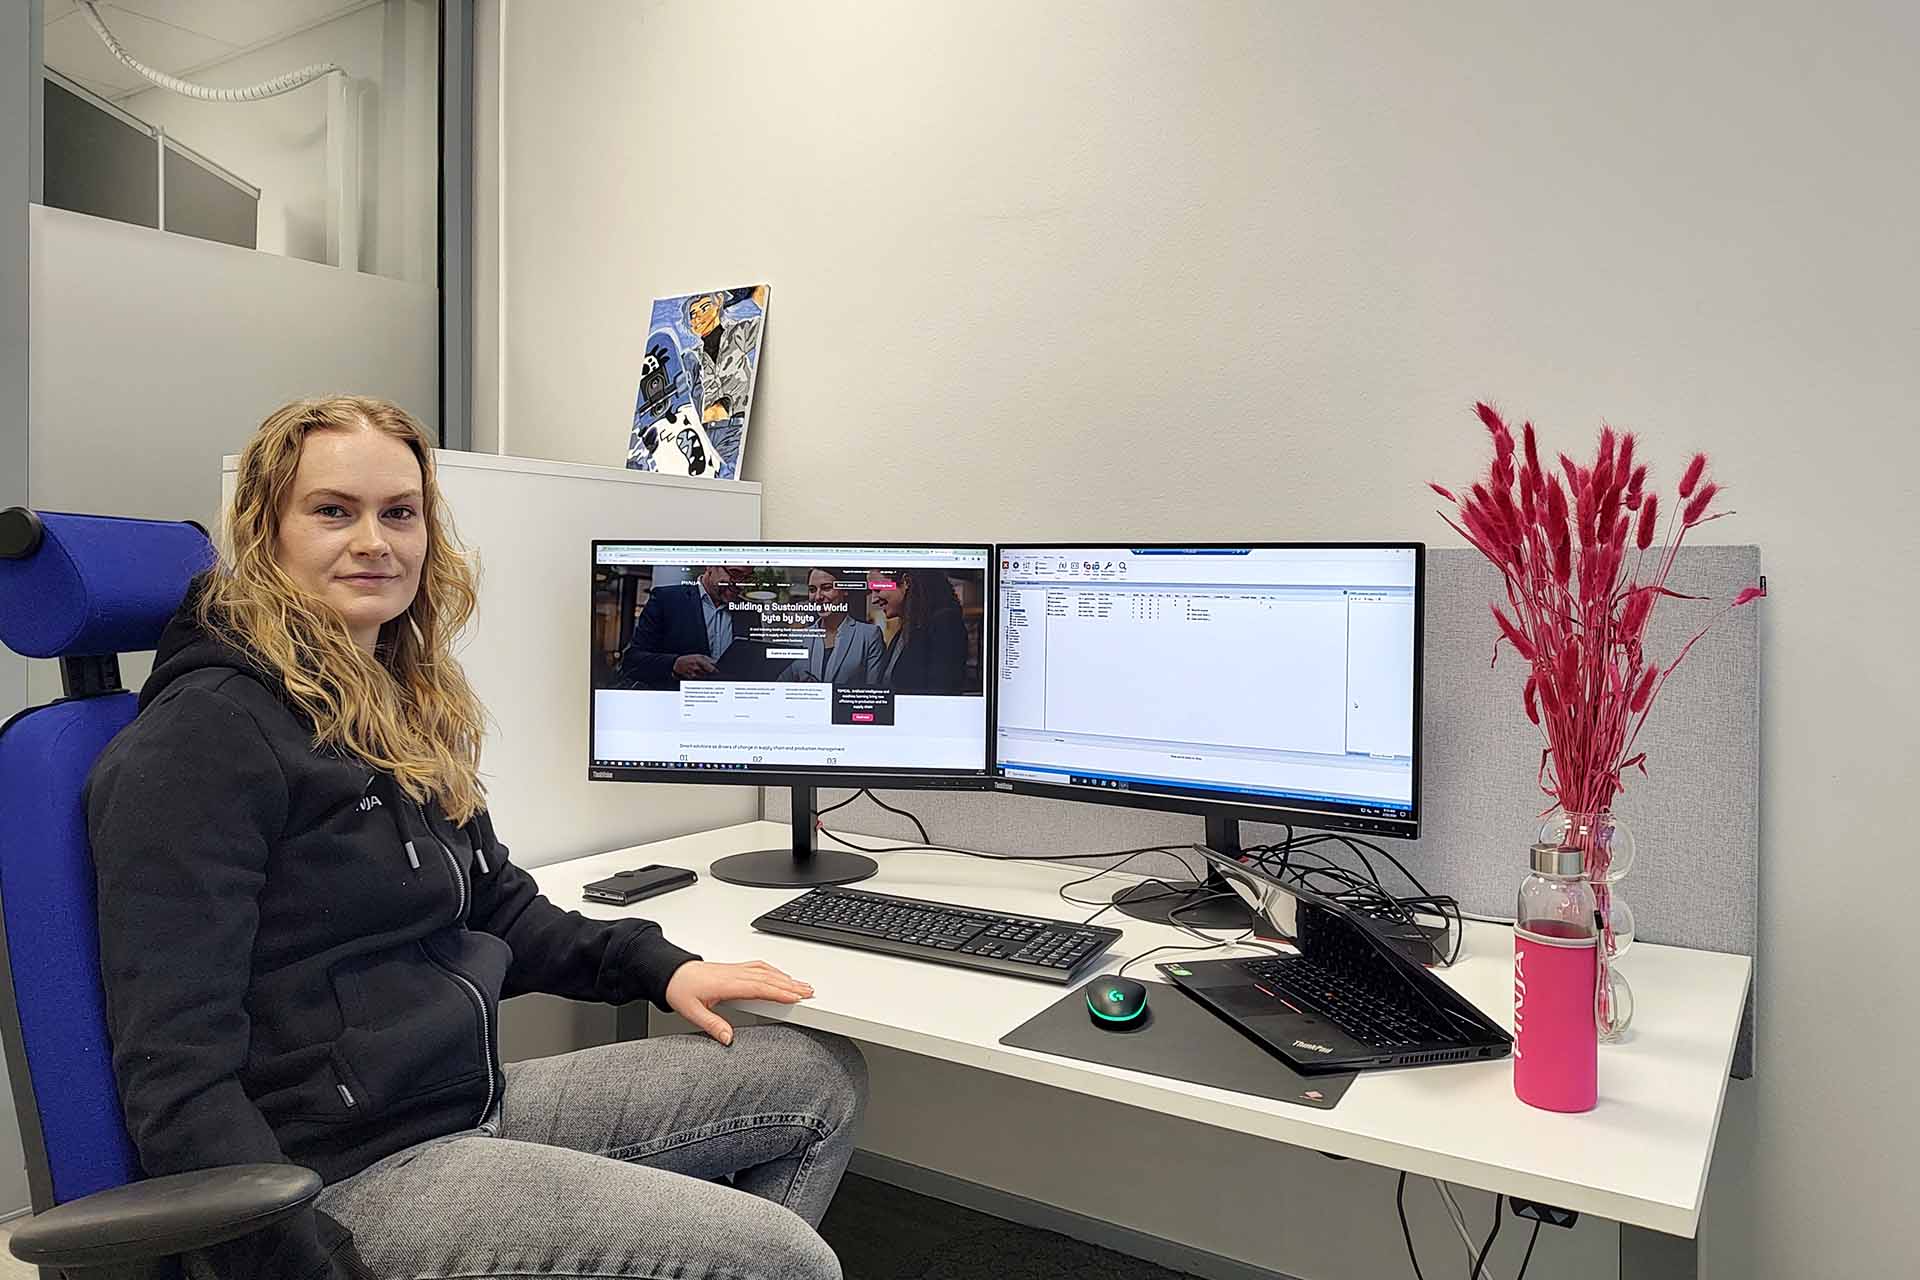 Blonde haired woman sitting in front of two screens at her desk